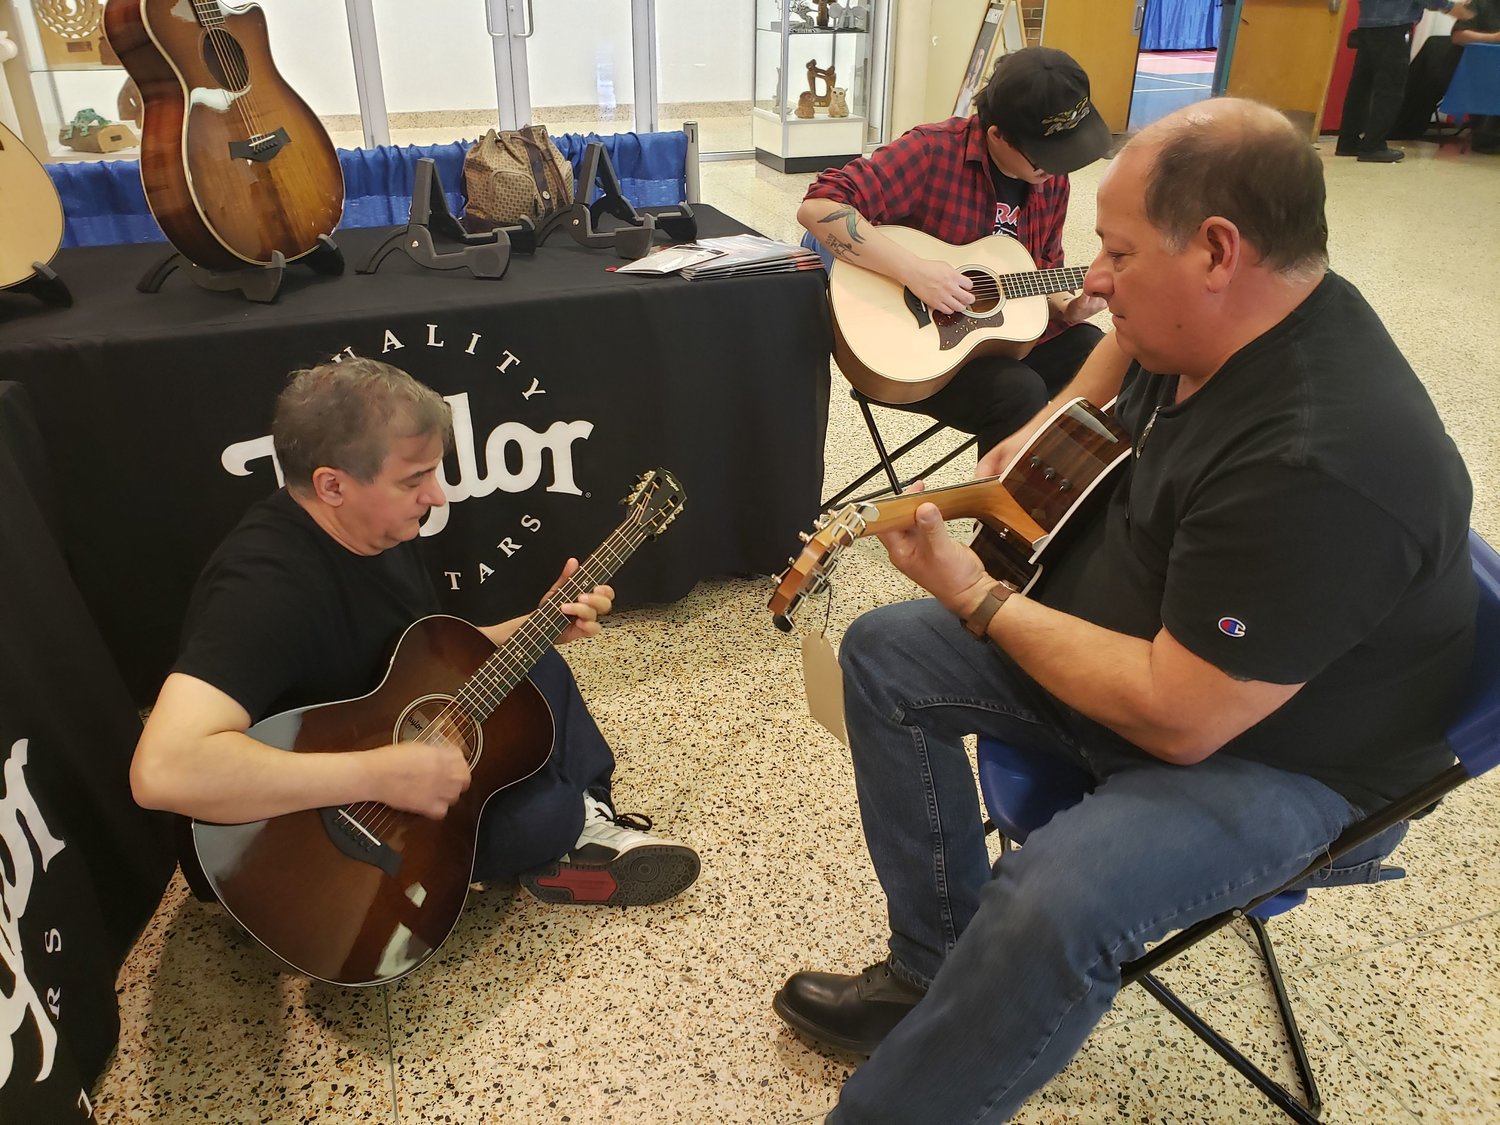 At the Taylor Guitars display, Freeporter Al Vinciguerra, right, was joined by O.J. Divietro, of East Islip, to jam out to Elvis Presley’s “Mystery Train” during the eighth annual New York Guitar Expo at the Freeport Recreation Center last Saturday.